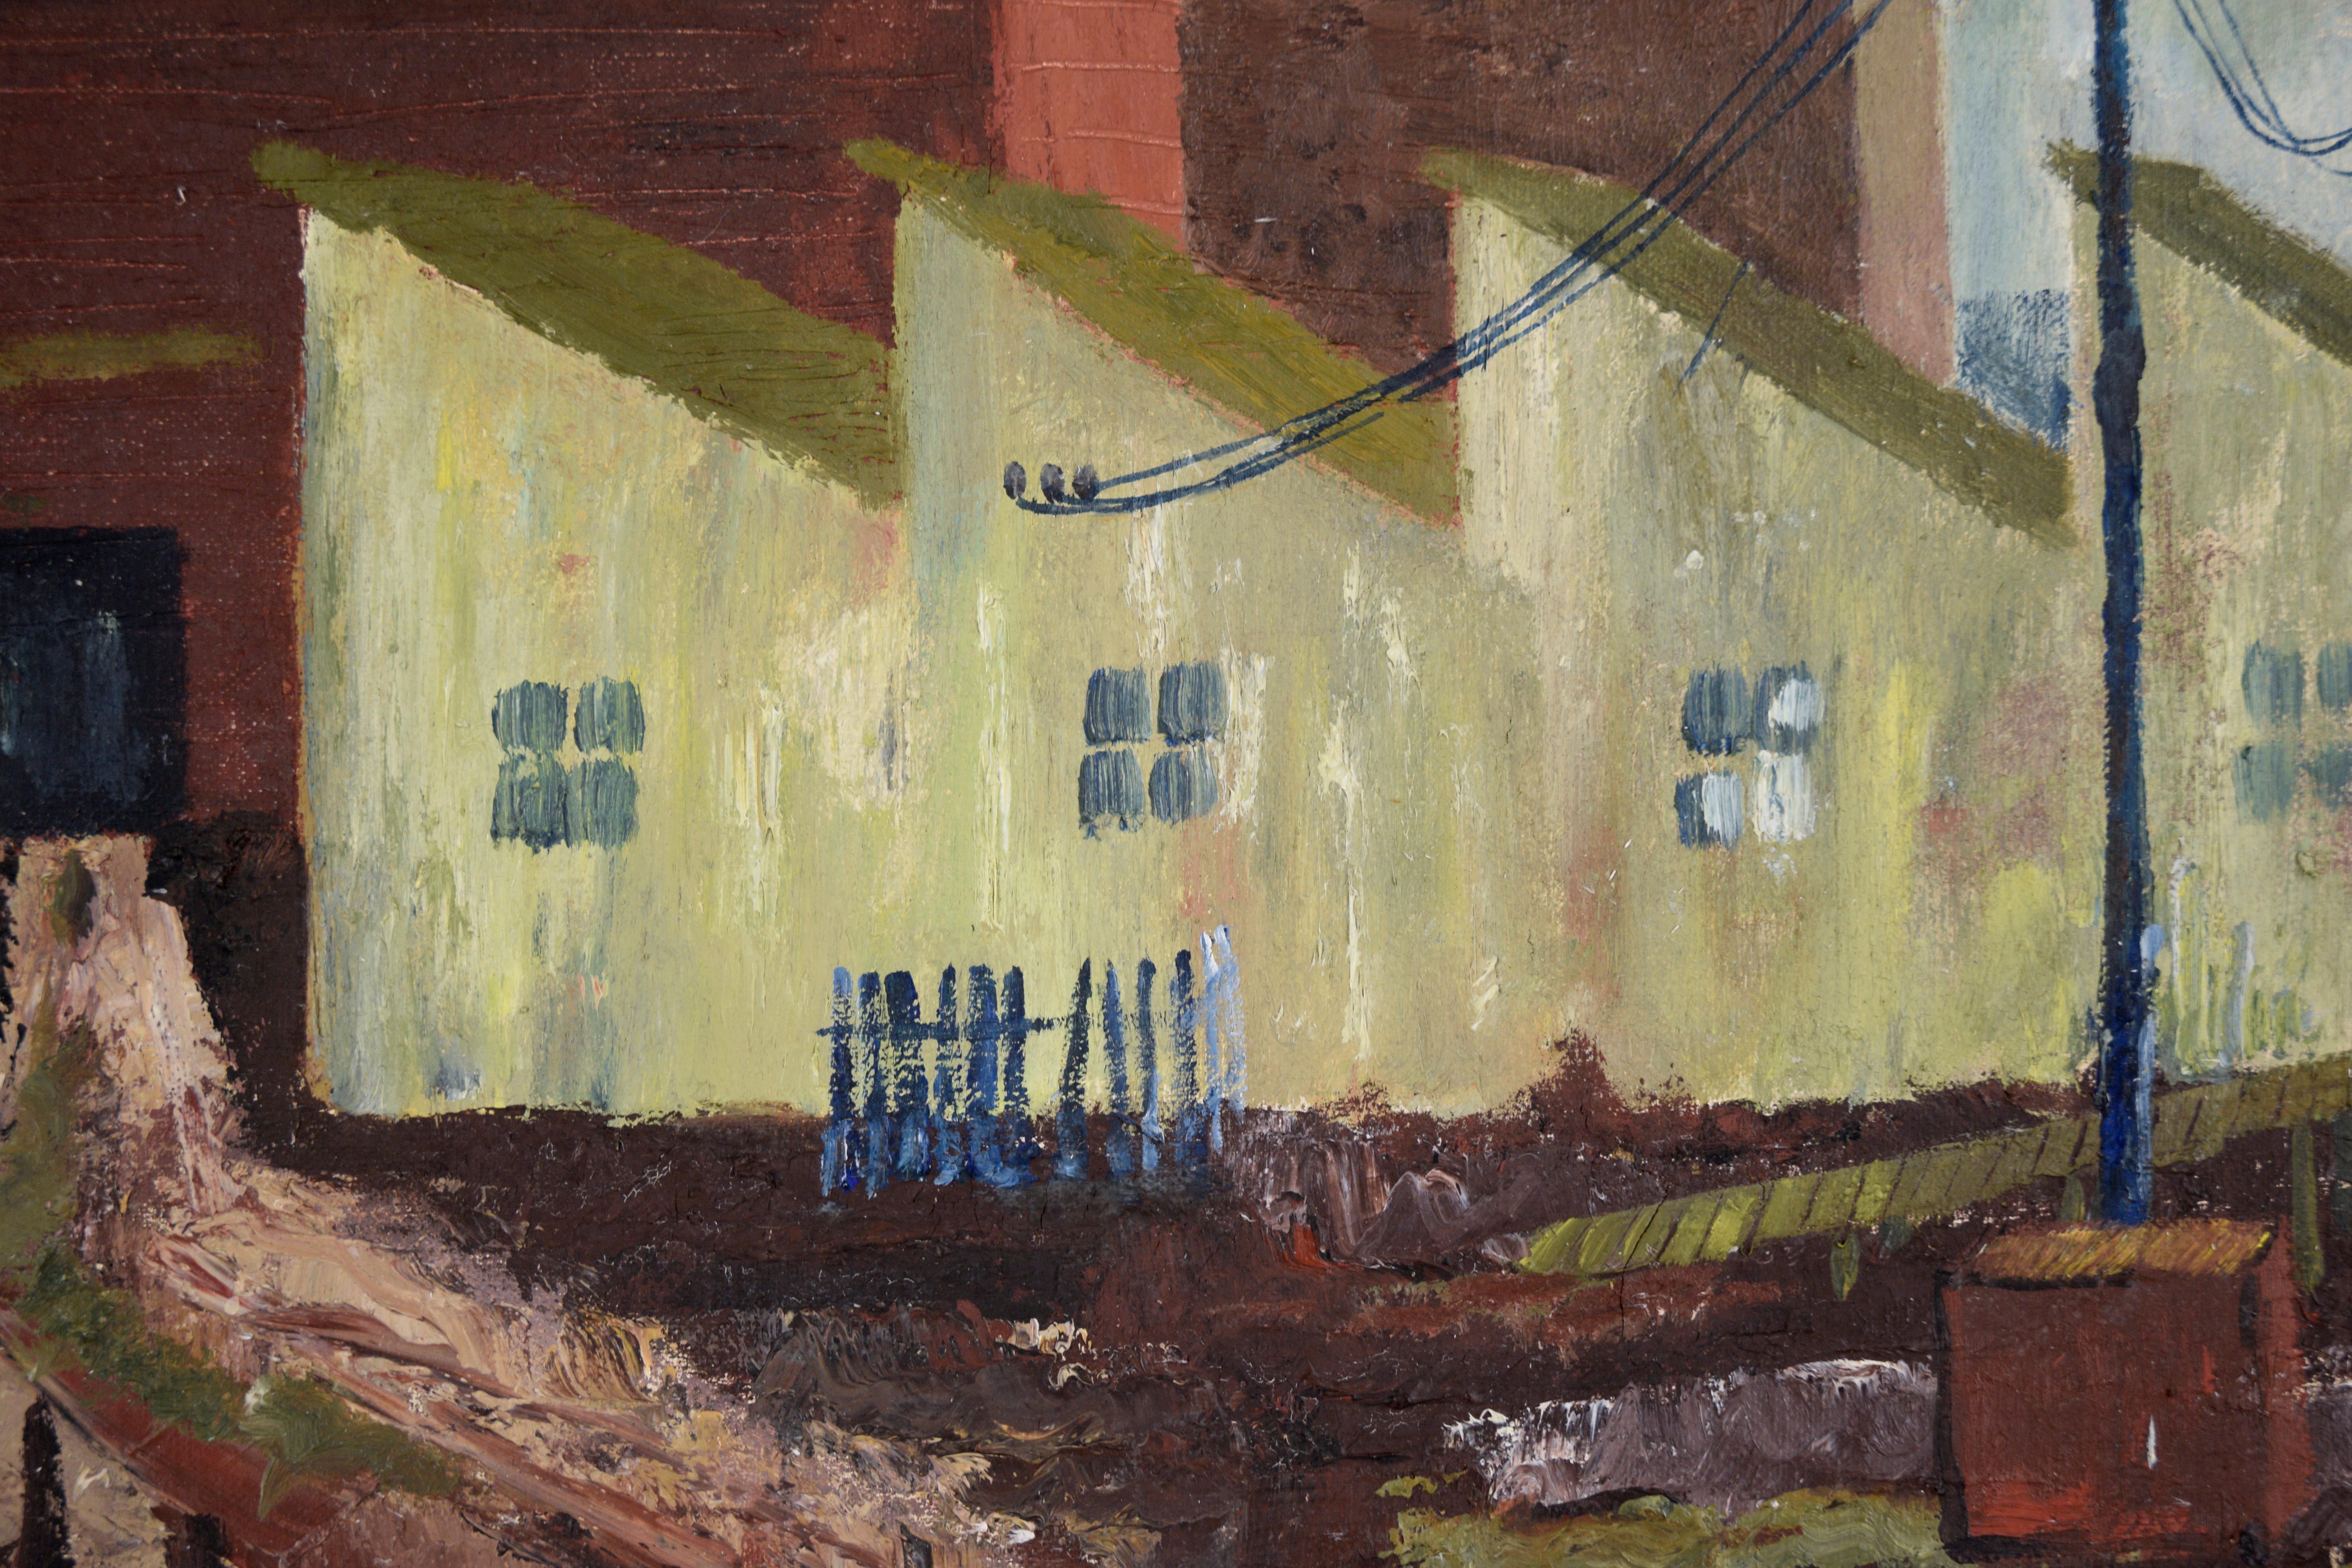 Industrial Landscape with Row Houses in Oil on Linen - Gray Landscape Painting by Doris Lyons Hoover